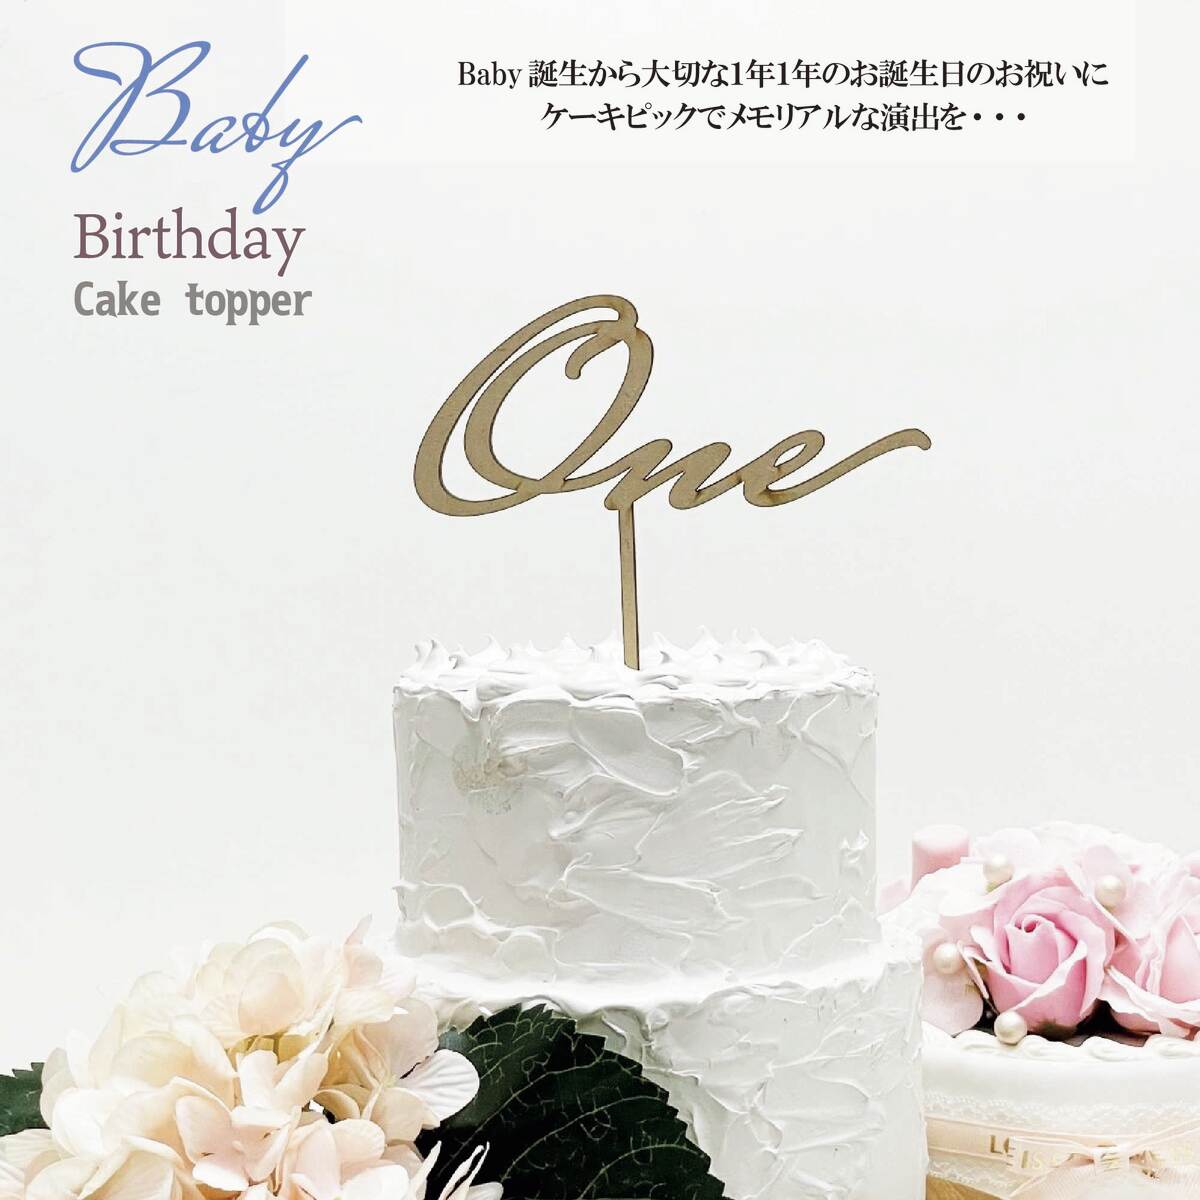 <strong>ケーキトッパー</strong> <strong>one</strong> ファーストバースデイ 誕生日 1歳 2歳 3歳 記念日 装飾 木製 オーナメント お祝い デコレーション　テーブルナンバー One Two Three